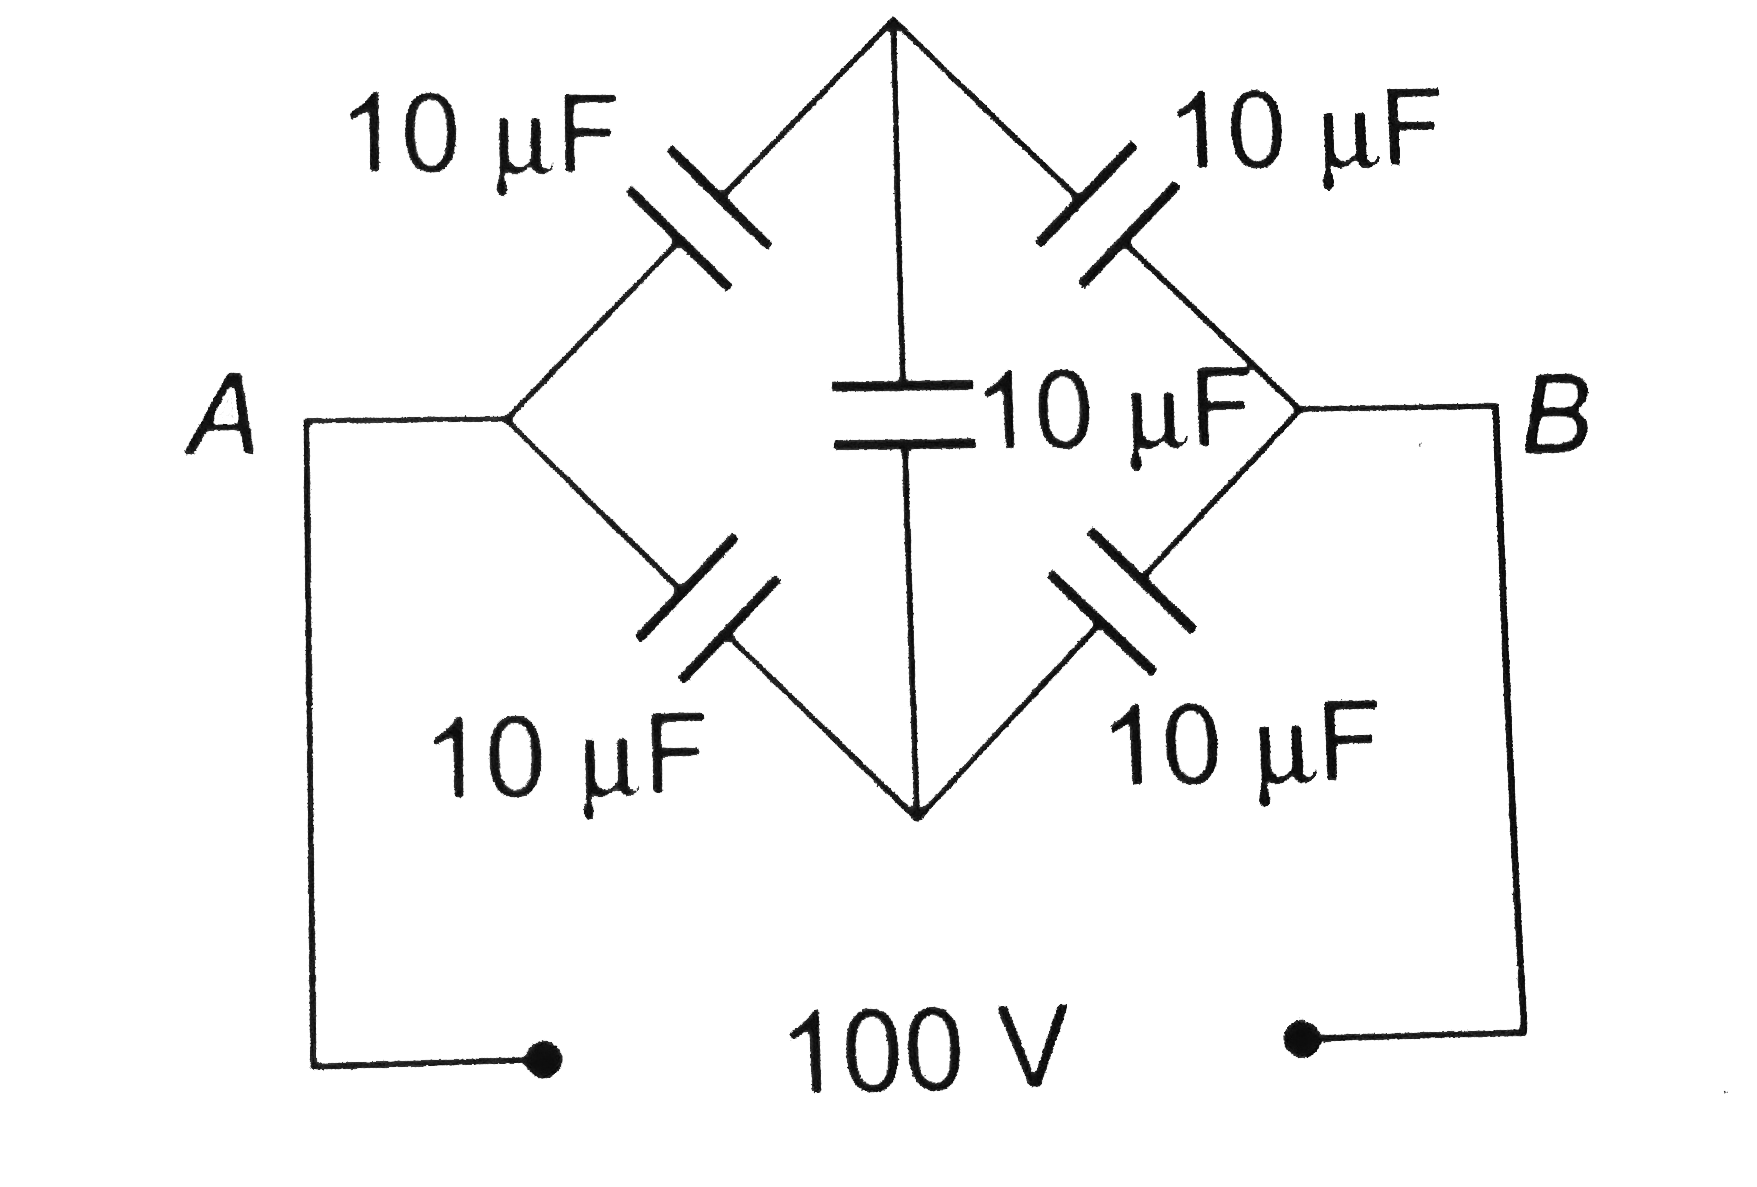 Five capacitors of 10 muf capacity each are connected to a.d.c potential of 100 volts as shown in the adjoining figure. The equivalent capacitance between the points A and B will be equal to